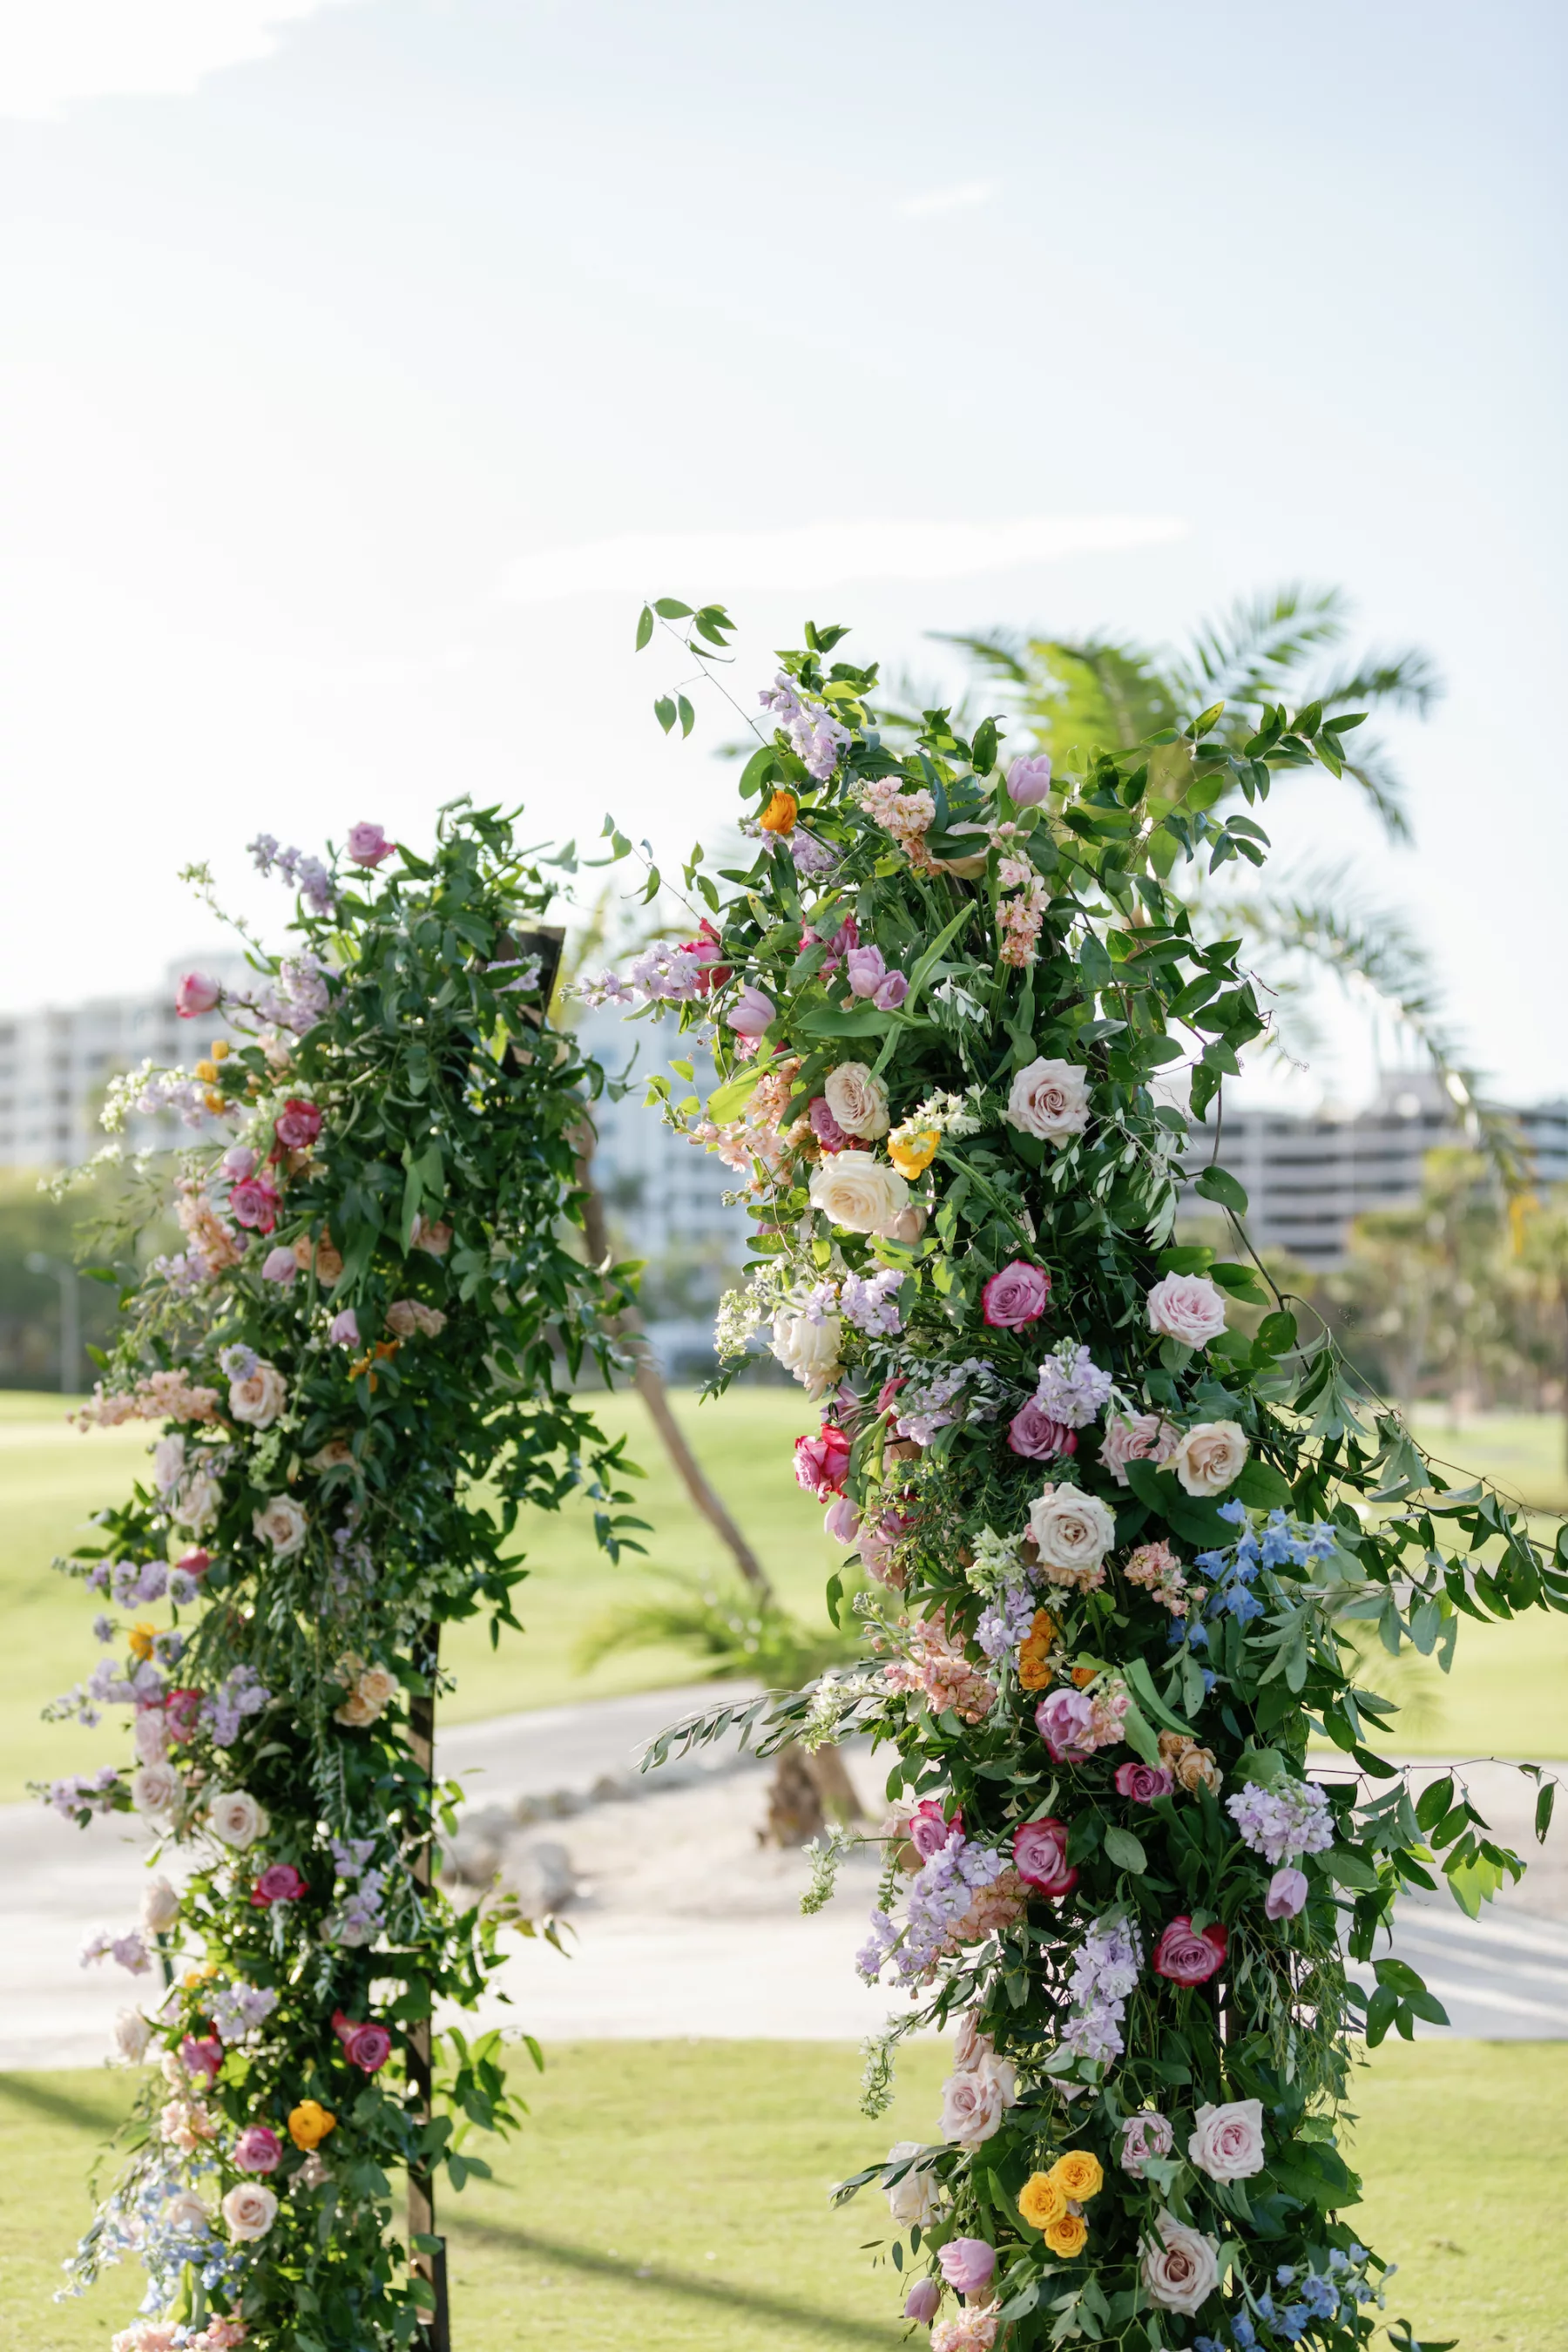 Whimsical Pastel Wildflower Outdoor Spring Wedding Ceremony Arch Decor Inspiration | Pink, Yellow, and White Roses, Purple Tulips, Ranunculus and Greenery Ideas